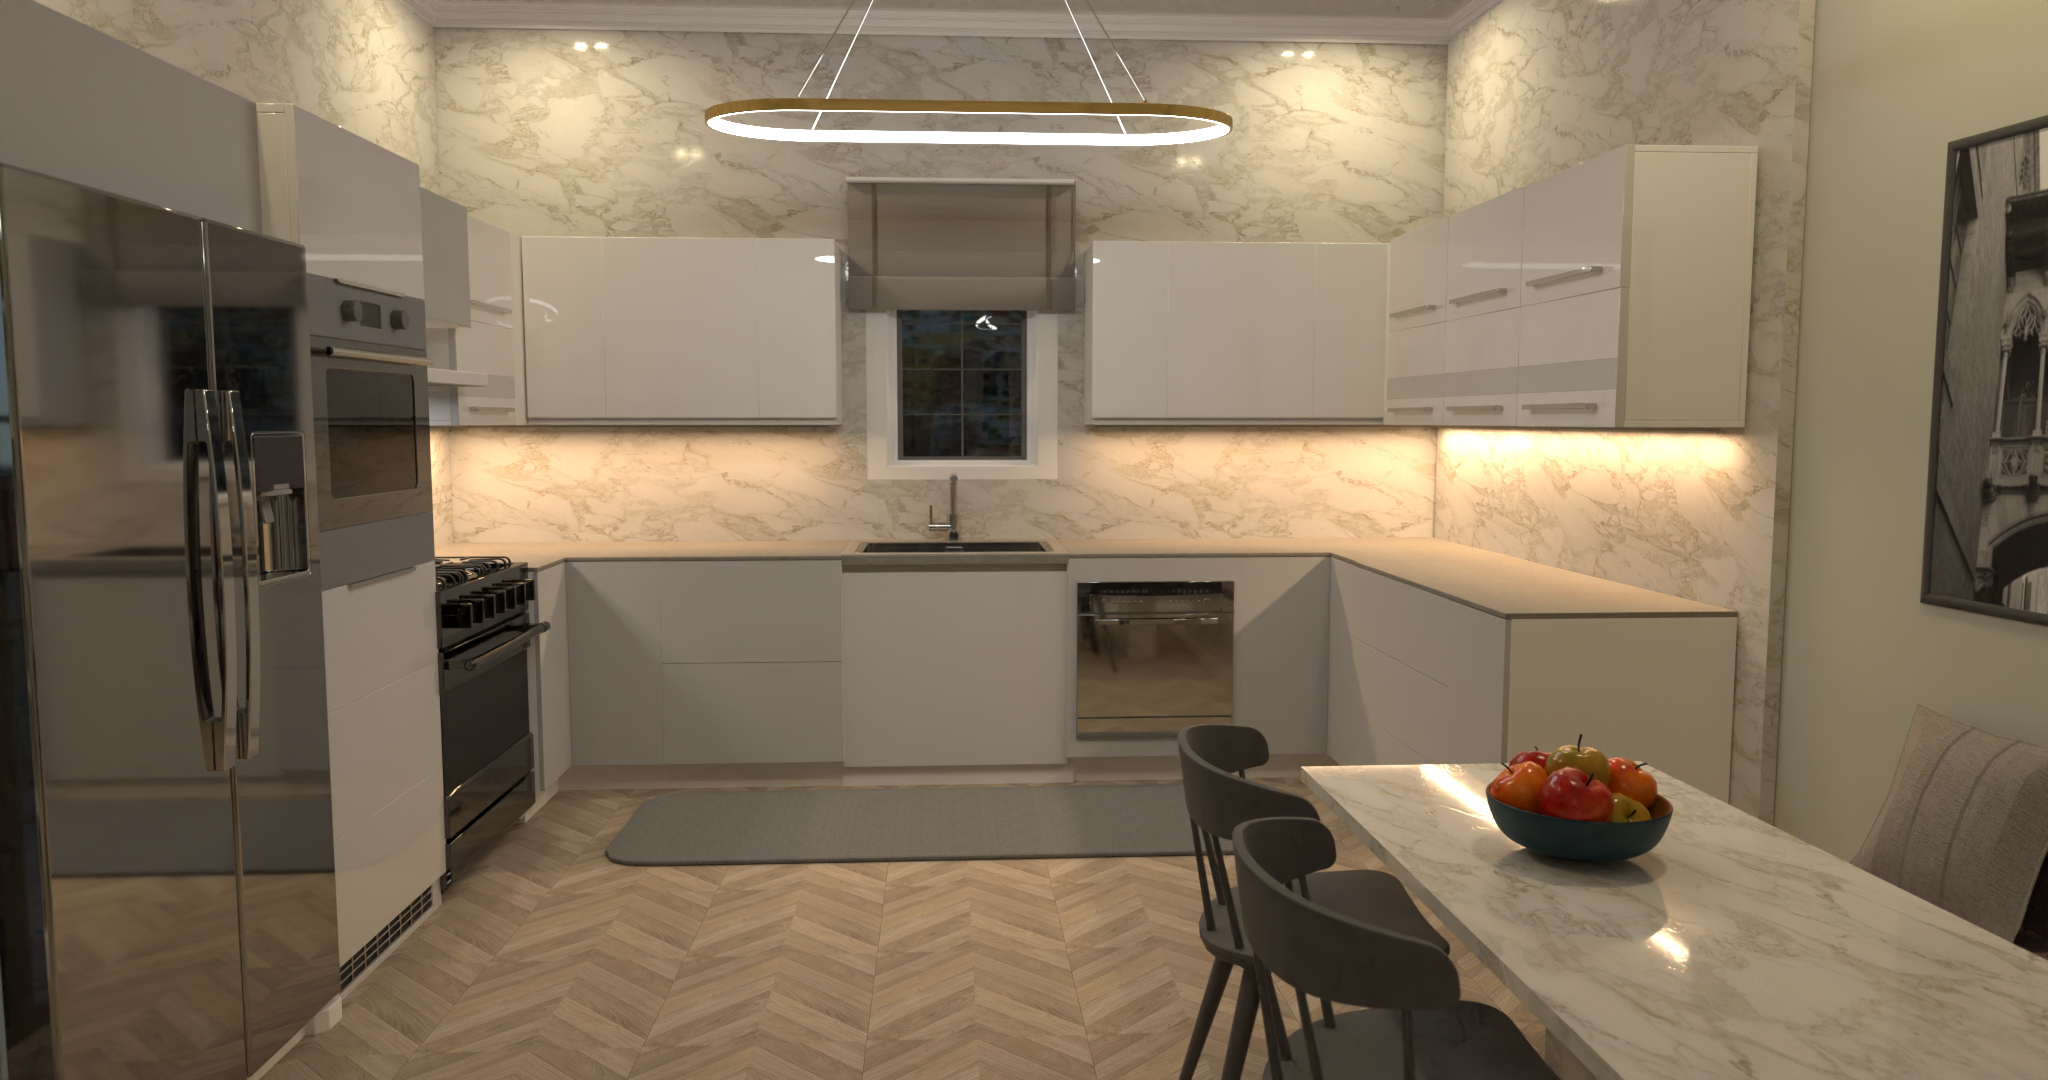 marble kitchen 10869800 by Michel image